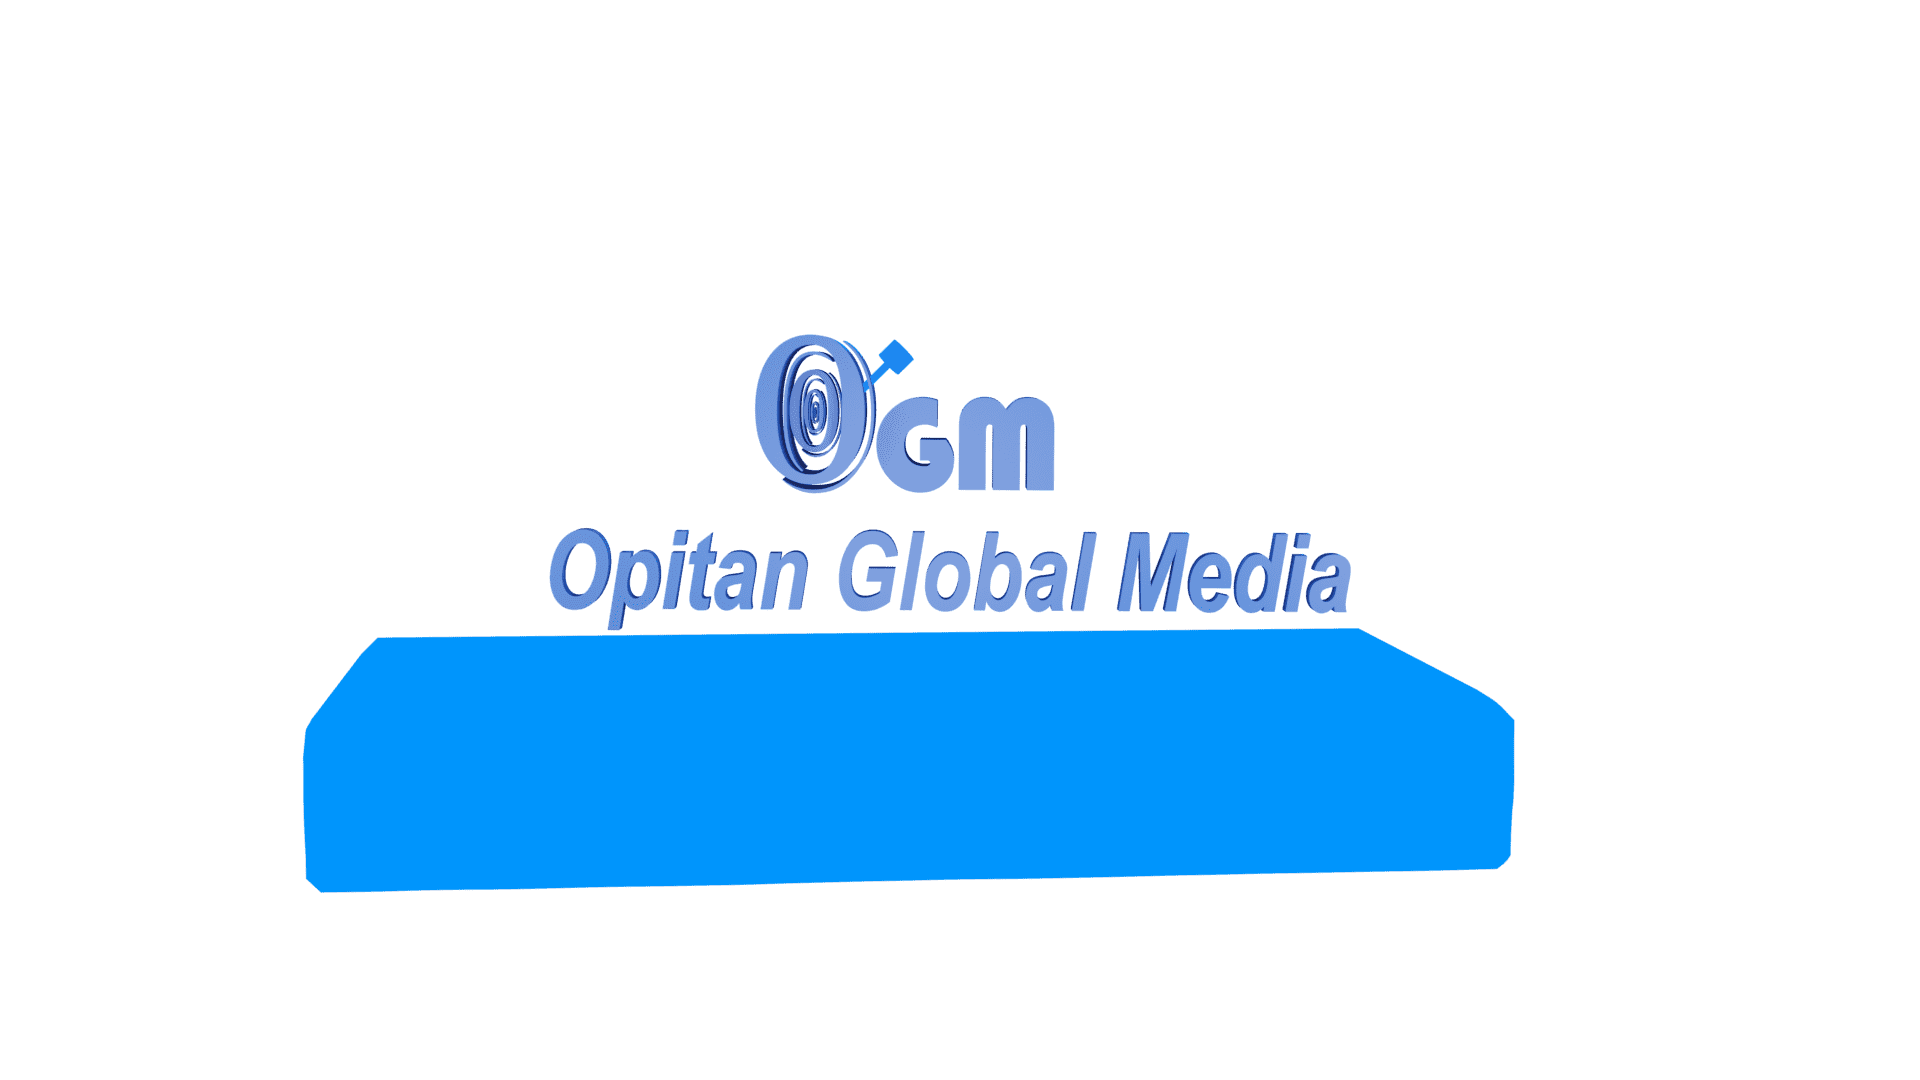 Opitan Global Media Stands As A Dynamic Tv Channel That Offers A Comprehensive And Insightful Verified News On All It Websites And Social Media Platforms.